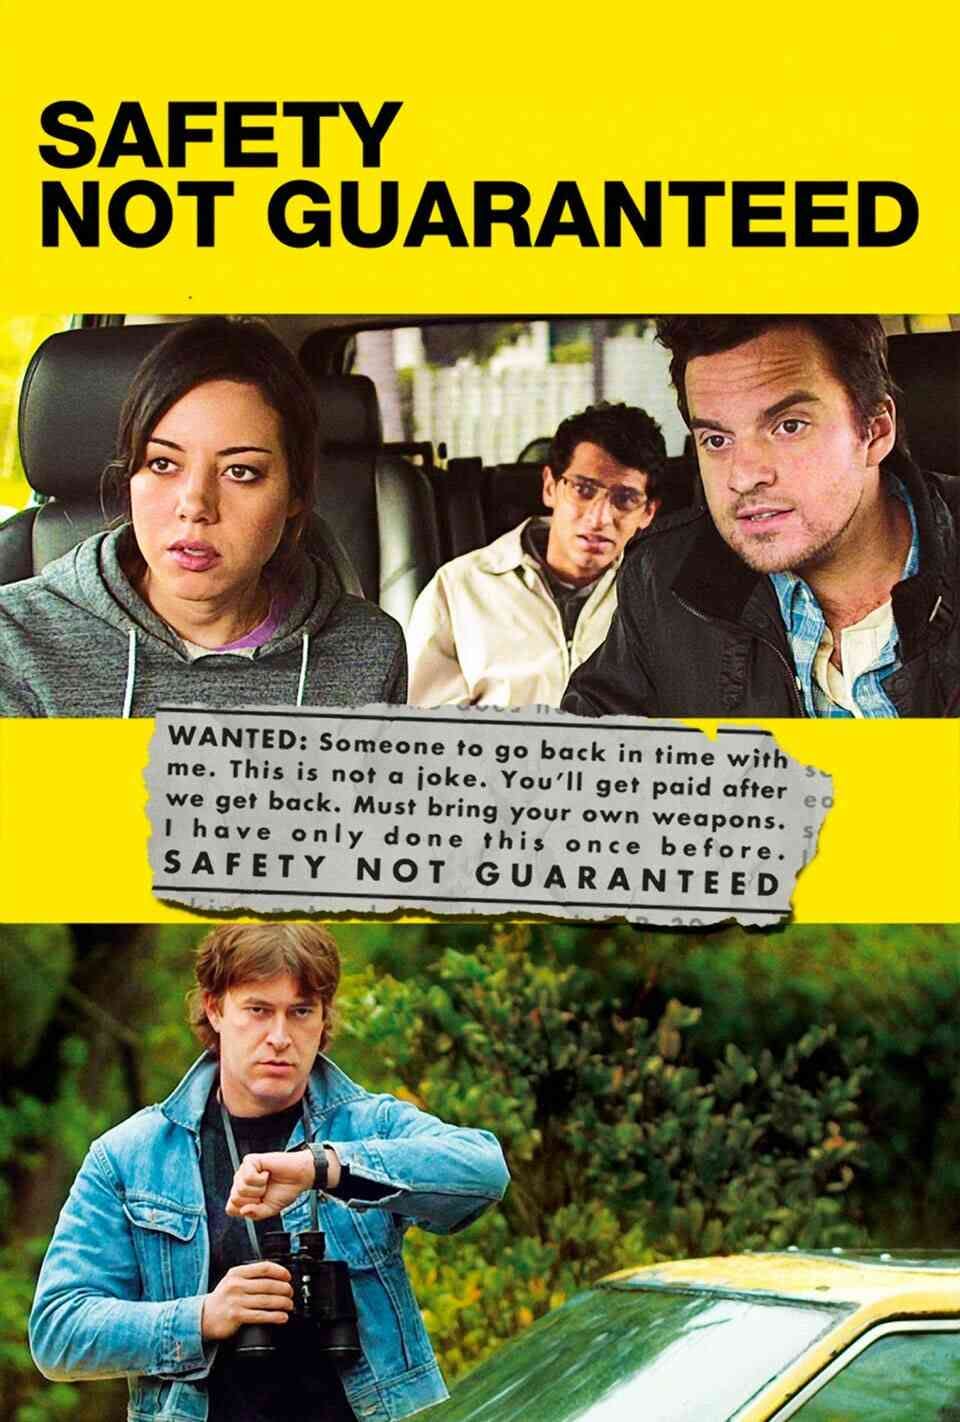 Read Safety Not Guaranteed screenplay (poster)